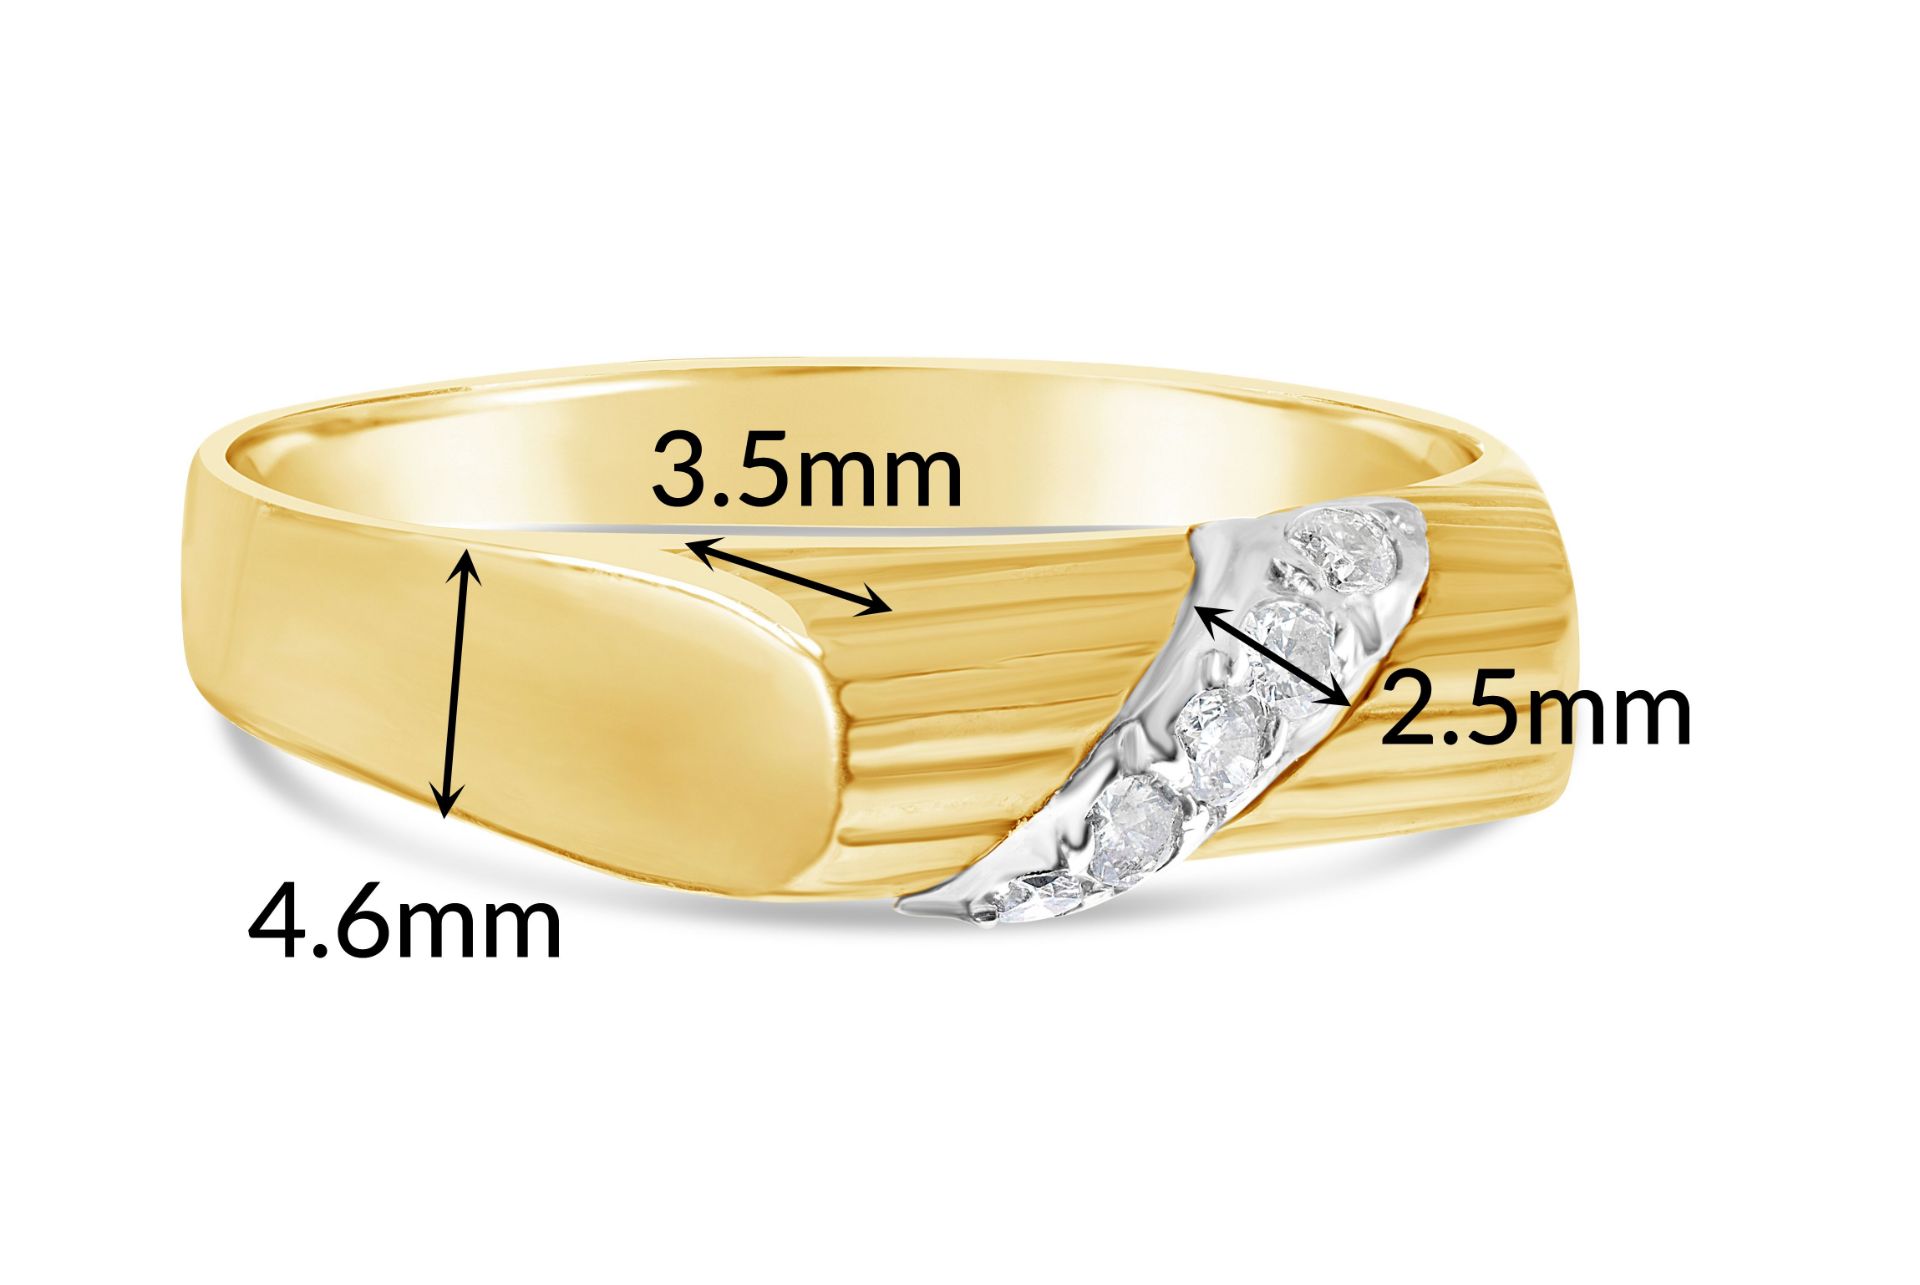 Diamond ring, Metal 9ct yellow gold, Weight 1.61, Diamond Weight (ct) 0.03, Colour H, Clarity SI2, - Image 2 of 2